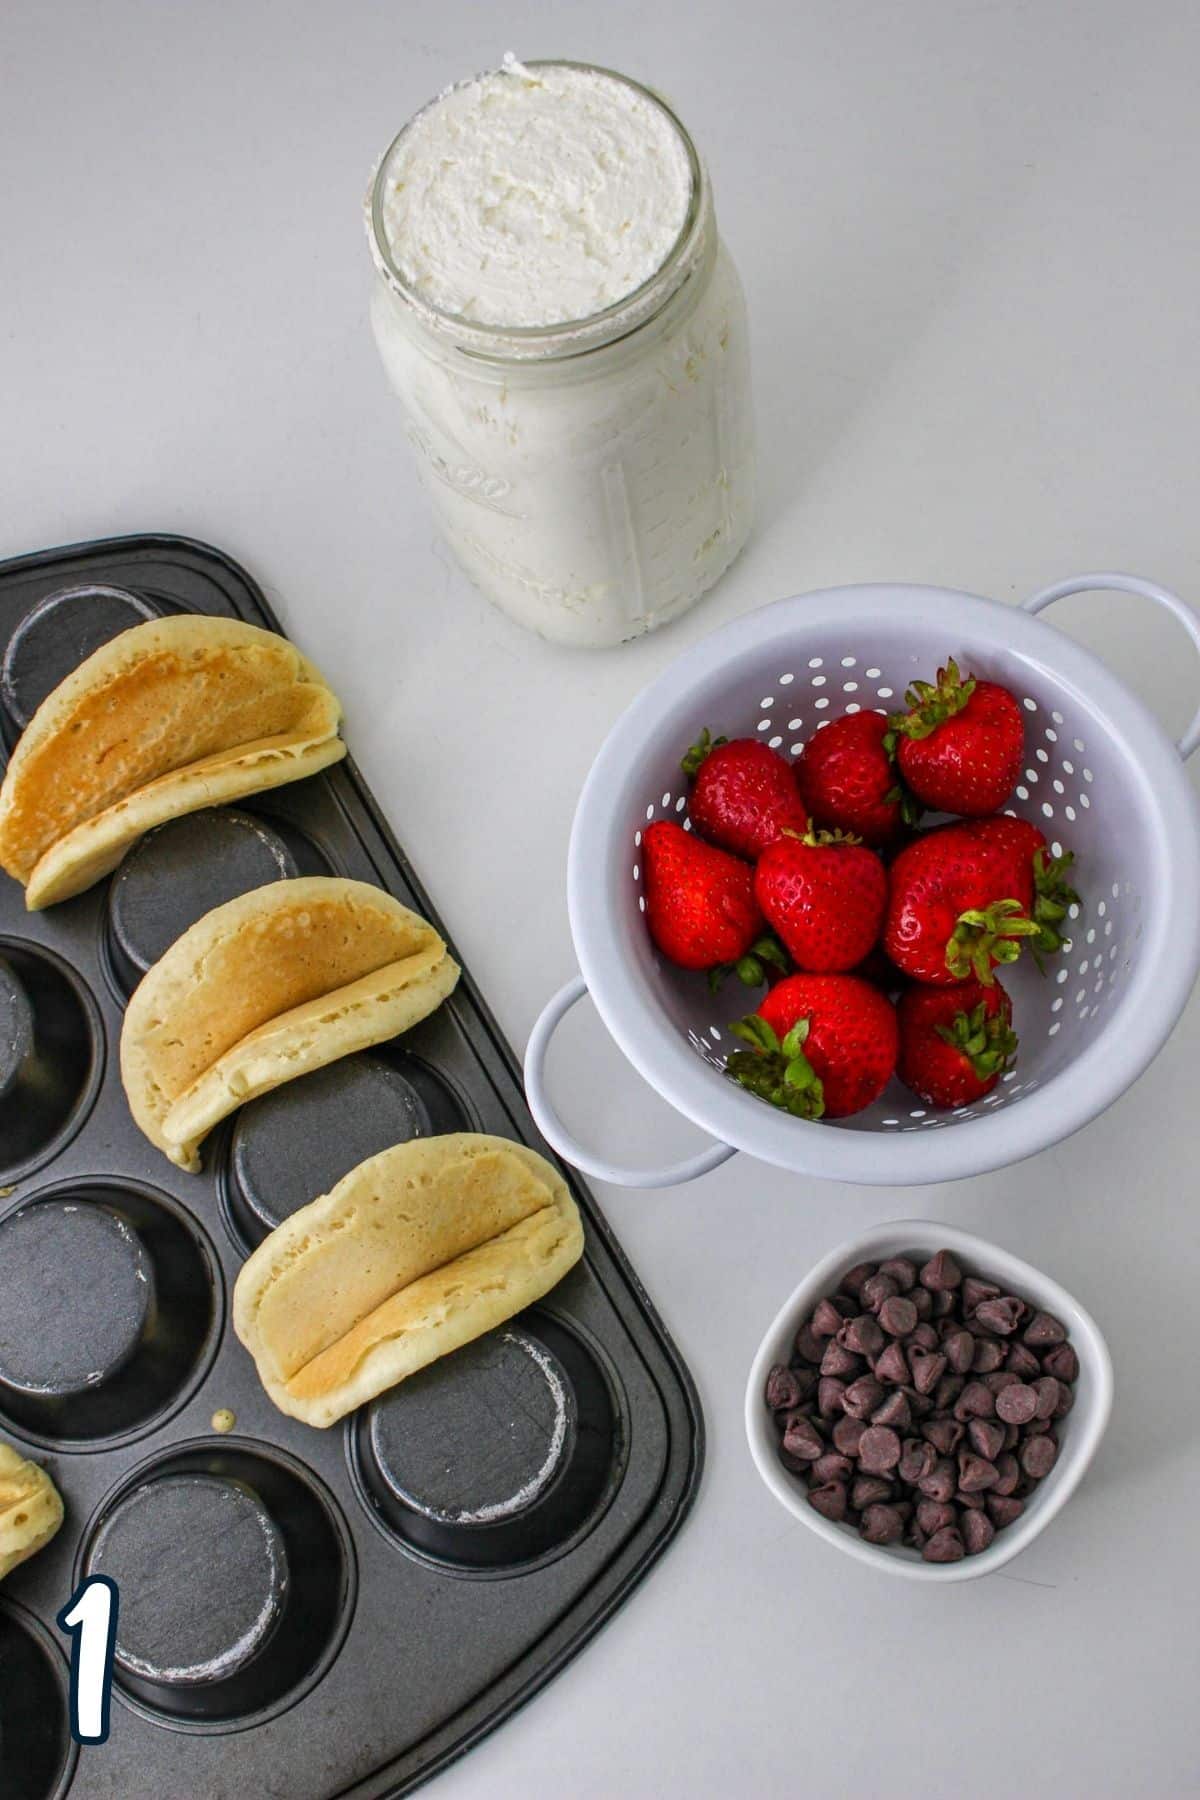 Ingredients shown to make pancake tacos filled with strawberries. 